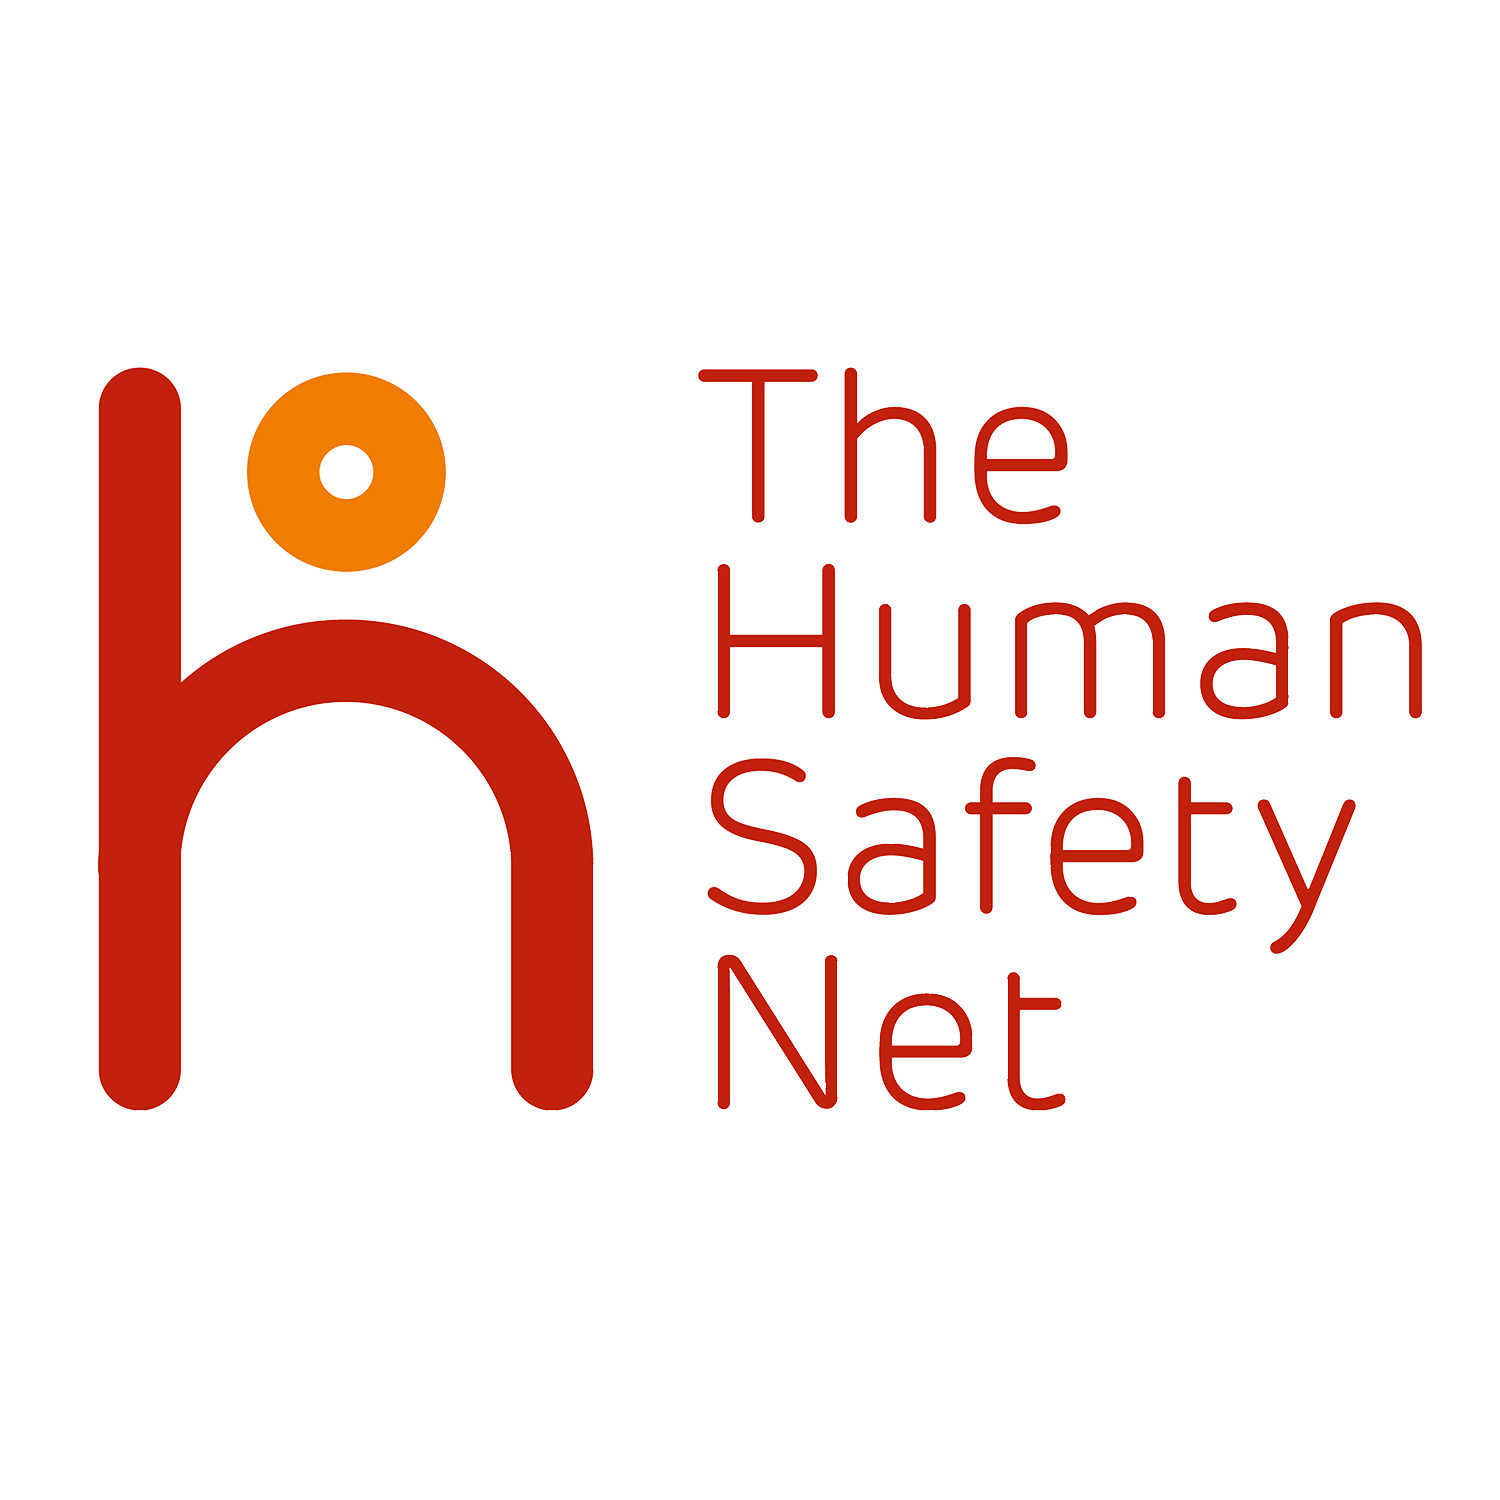 The Human Safety Net Foundation